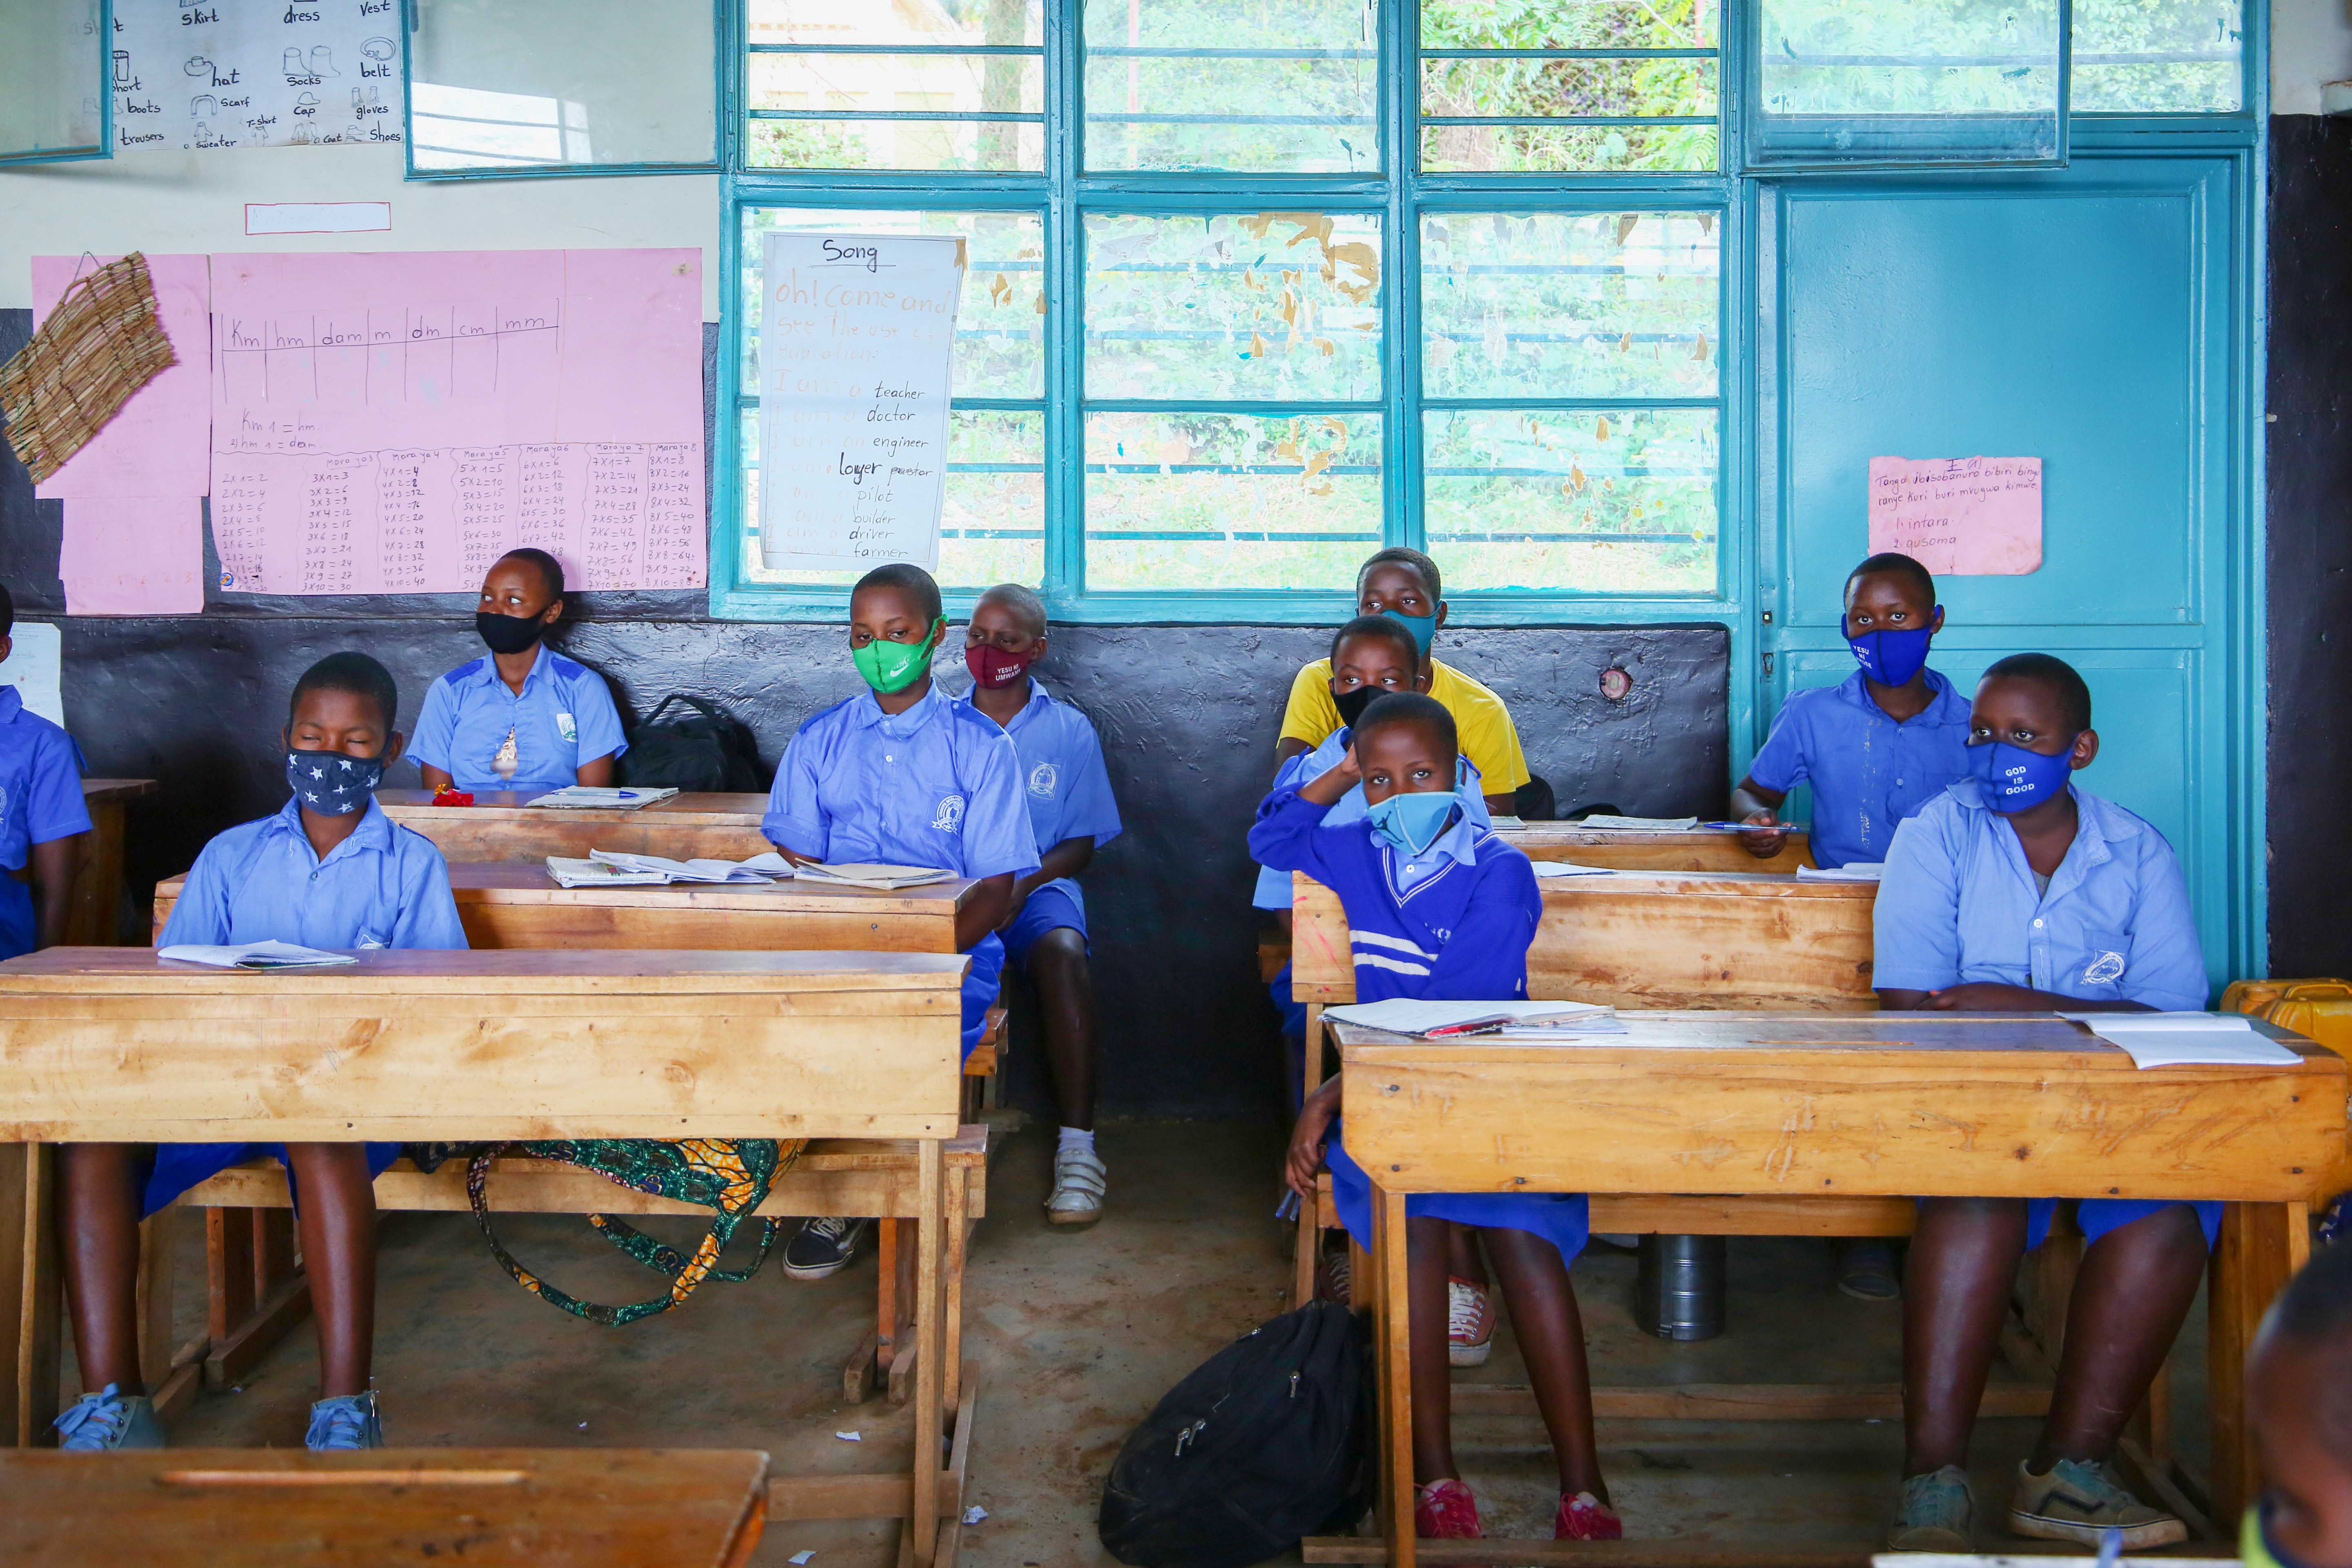 P6 students  wearing face masks during class at  Groupe Scolaire Kimironko . Photos by Dan Nsengiyumva